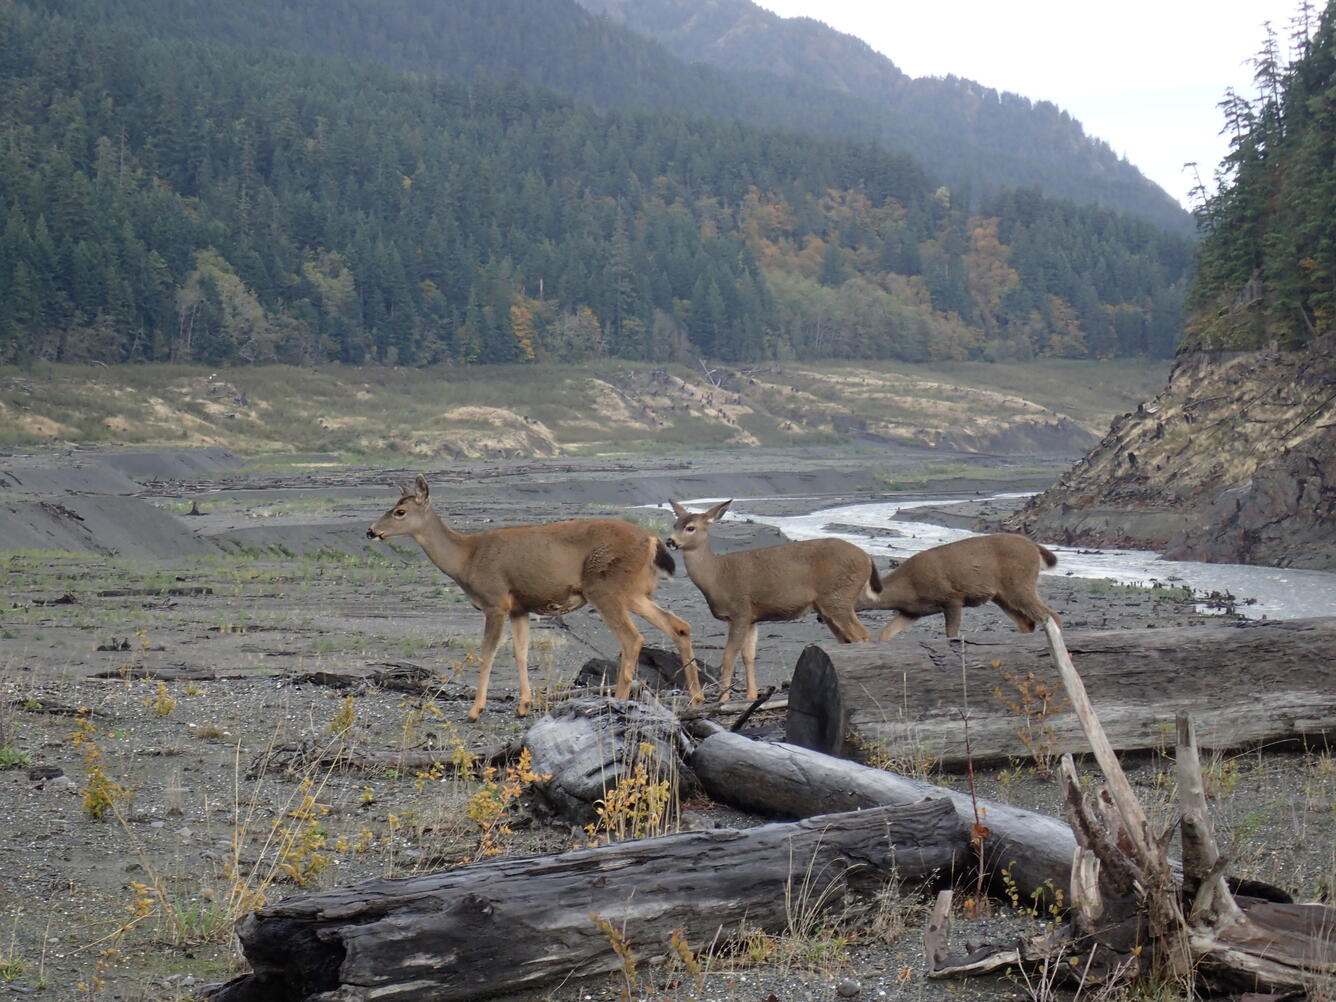 Deer in dewatered lake after dam removal in the Elwha river basin, WA